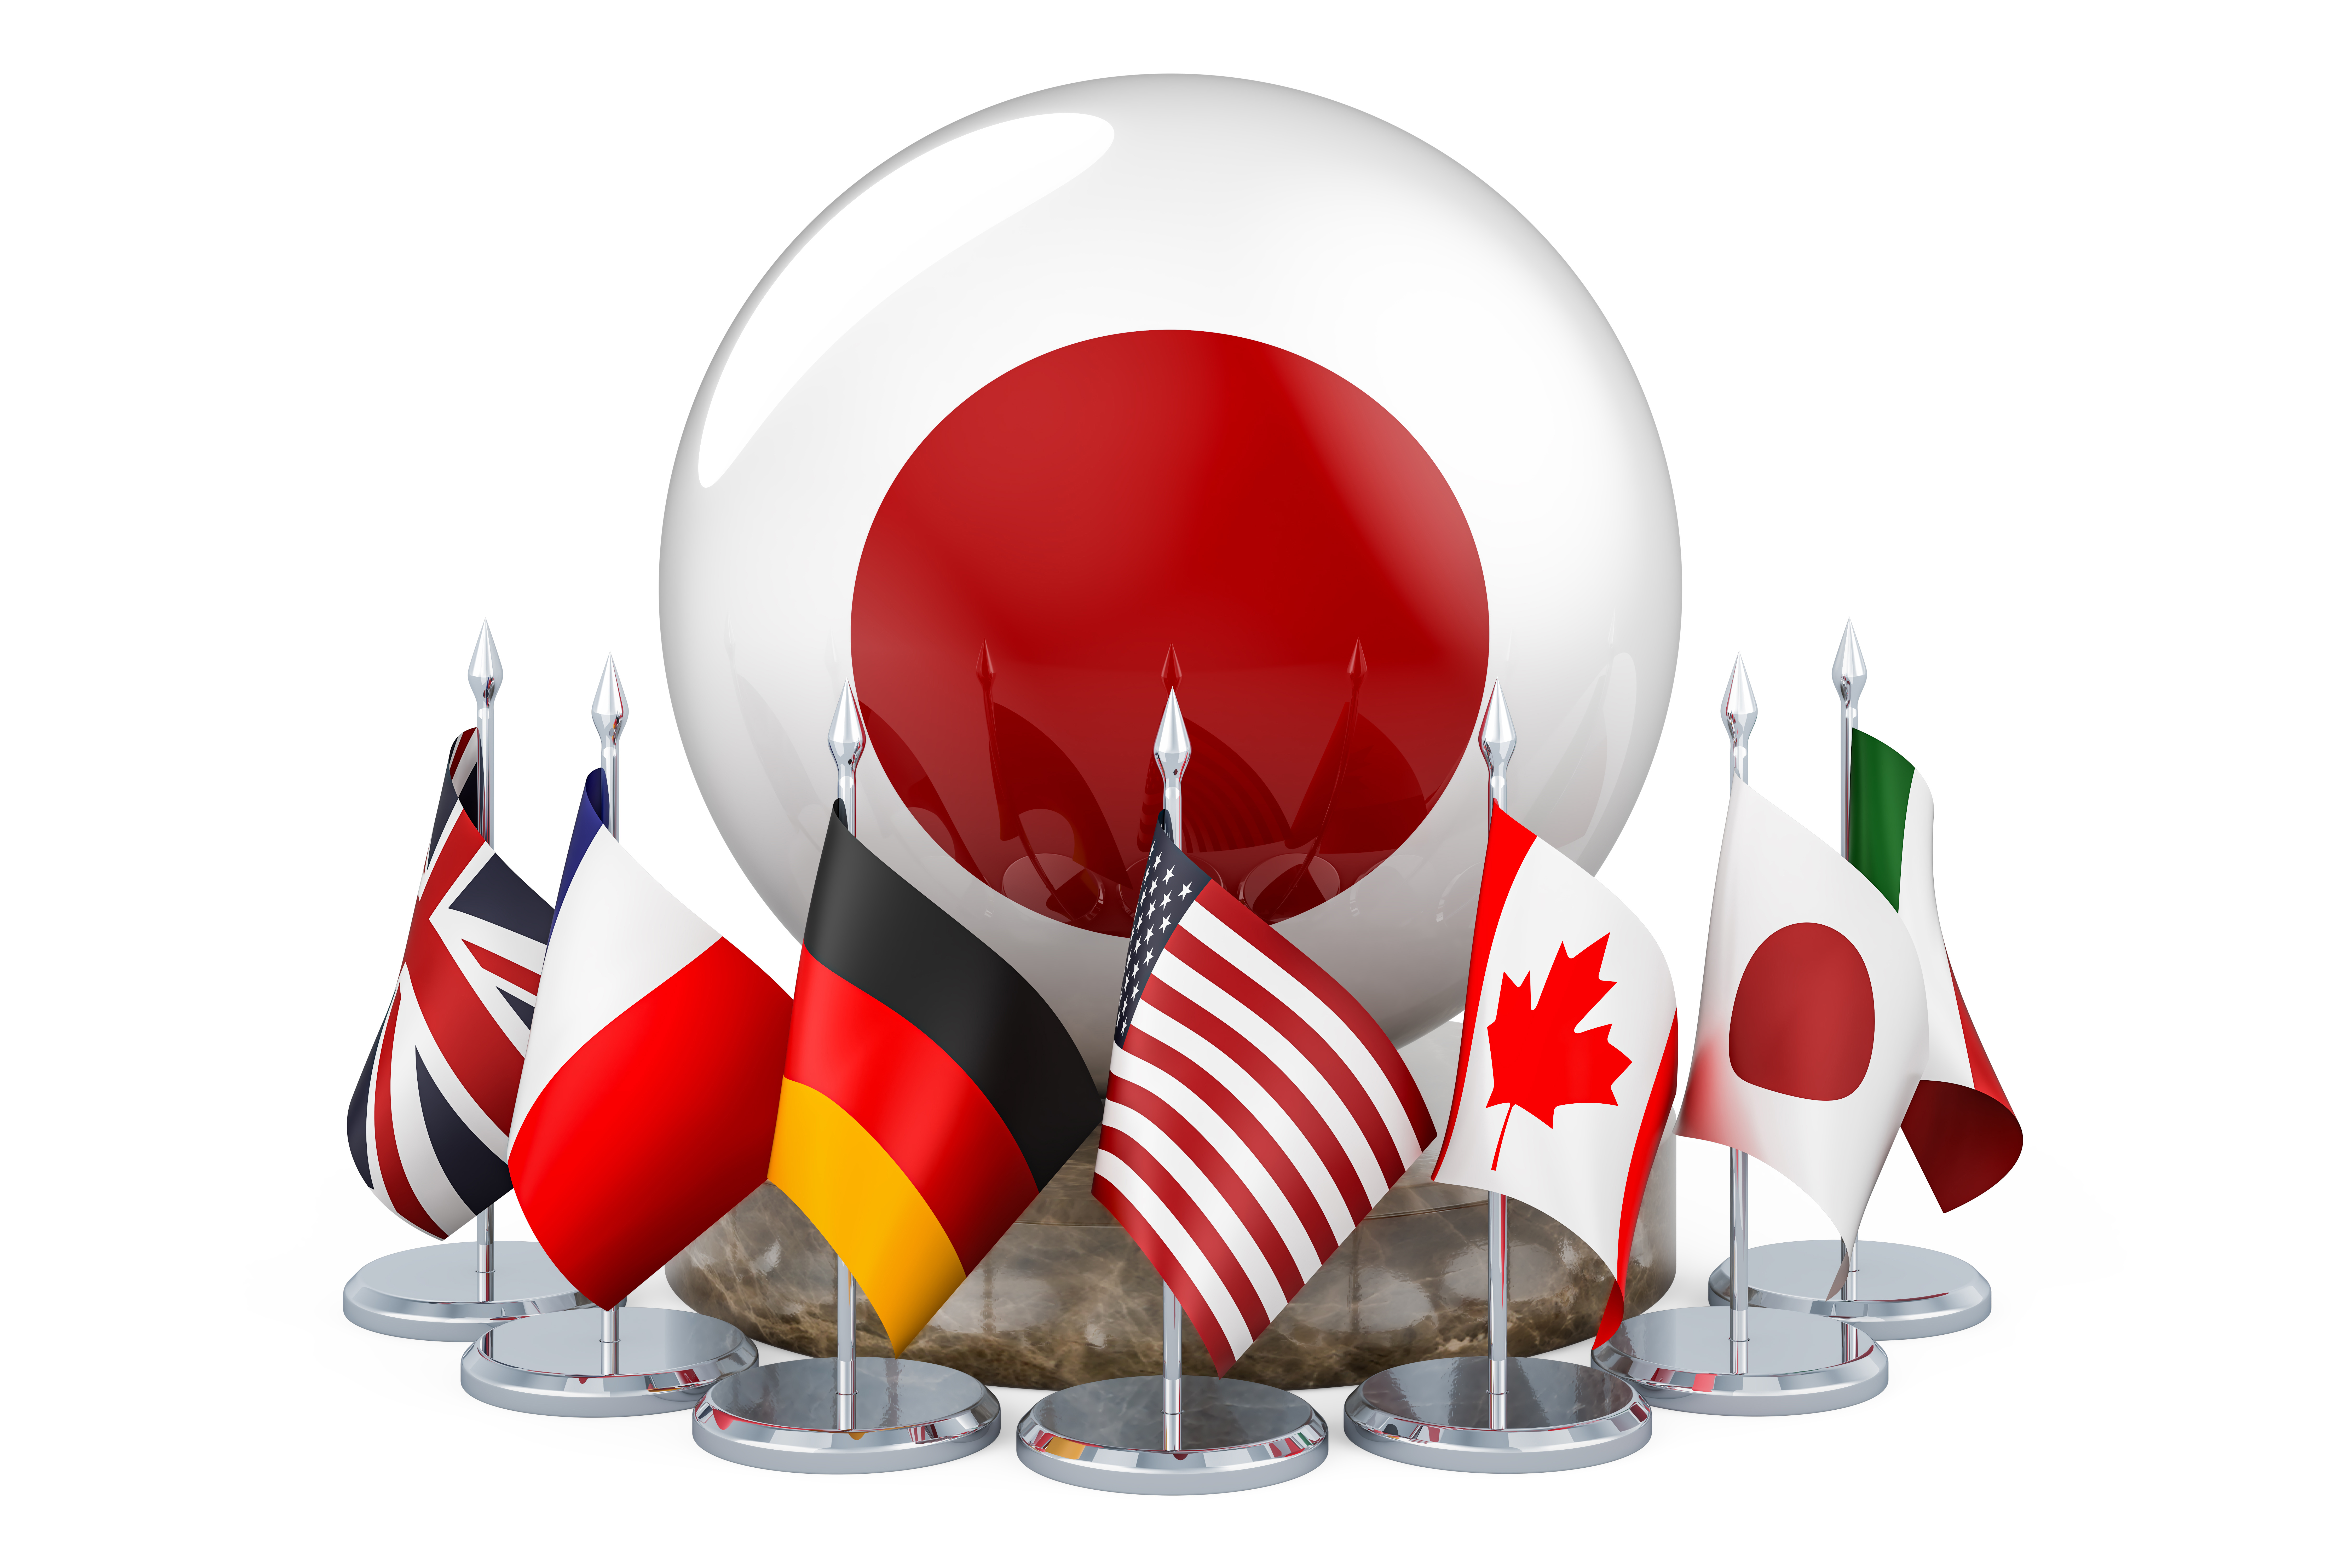 The flags of the G7 nations around a sphere decorated in the colors of the Japanese flag.